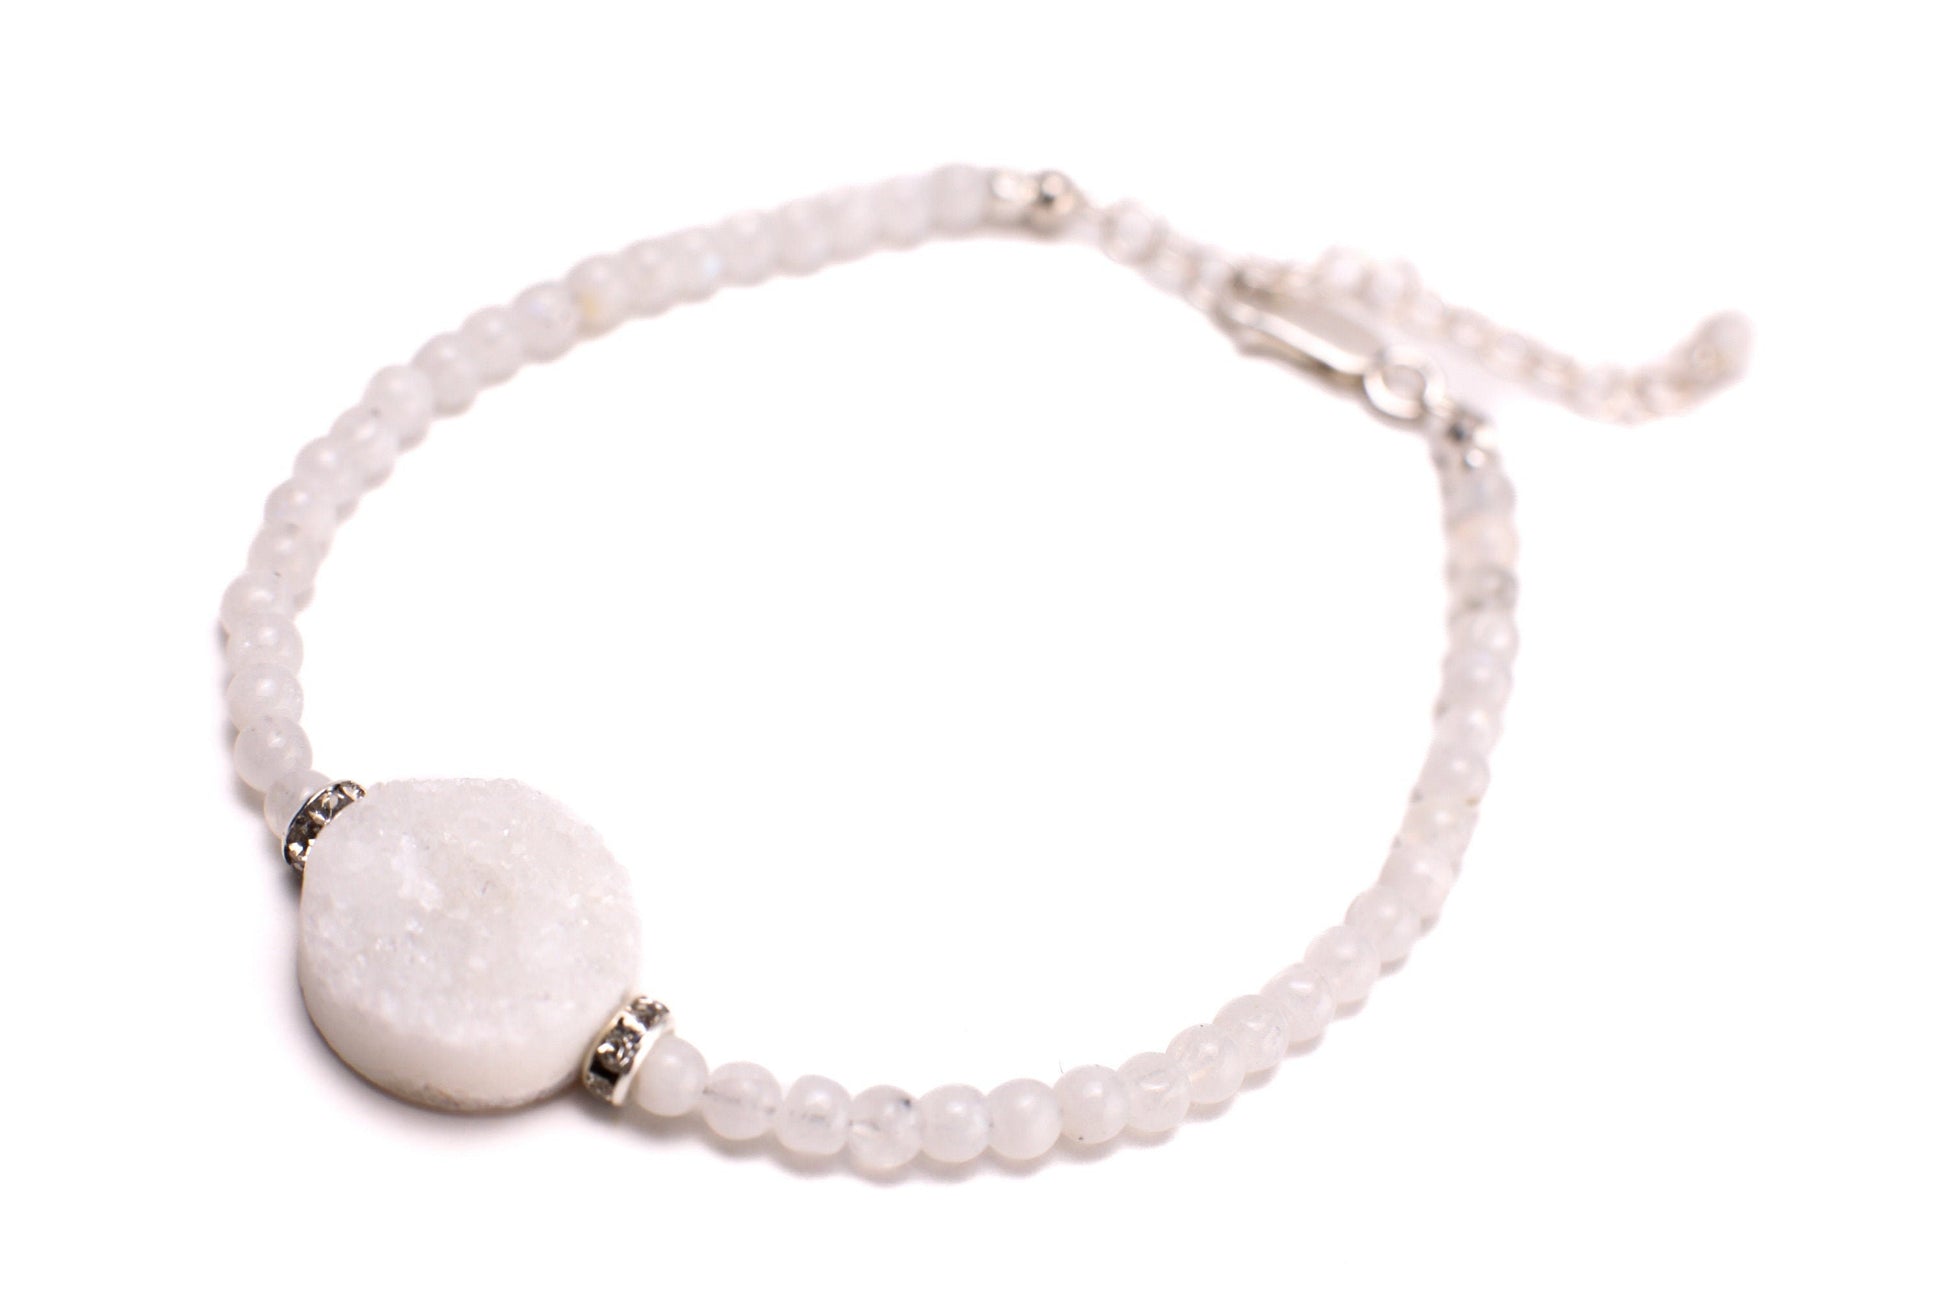 Moonstone smooth round 4mm with natural Geod Drusy white center piece Bracelet in 925 Sterling Silver Chain and Clasp,